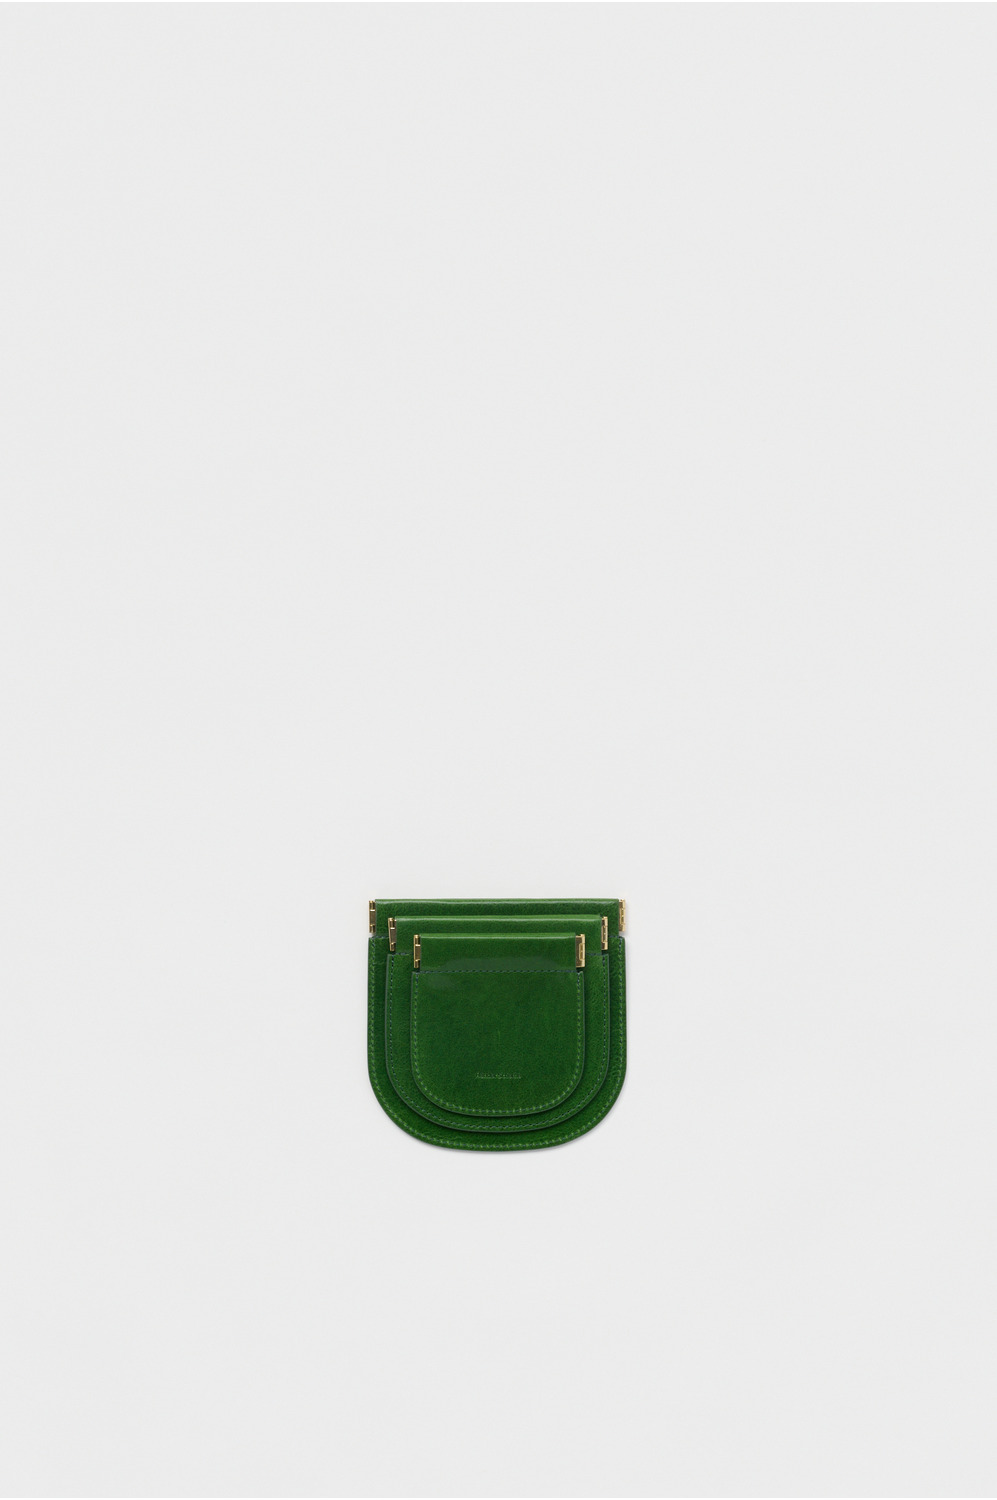 coin purse M 詳細画像 lime green 2